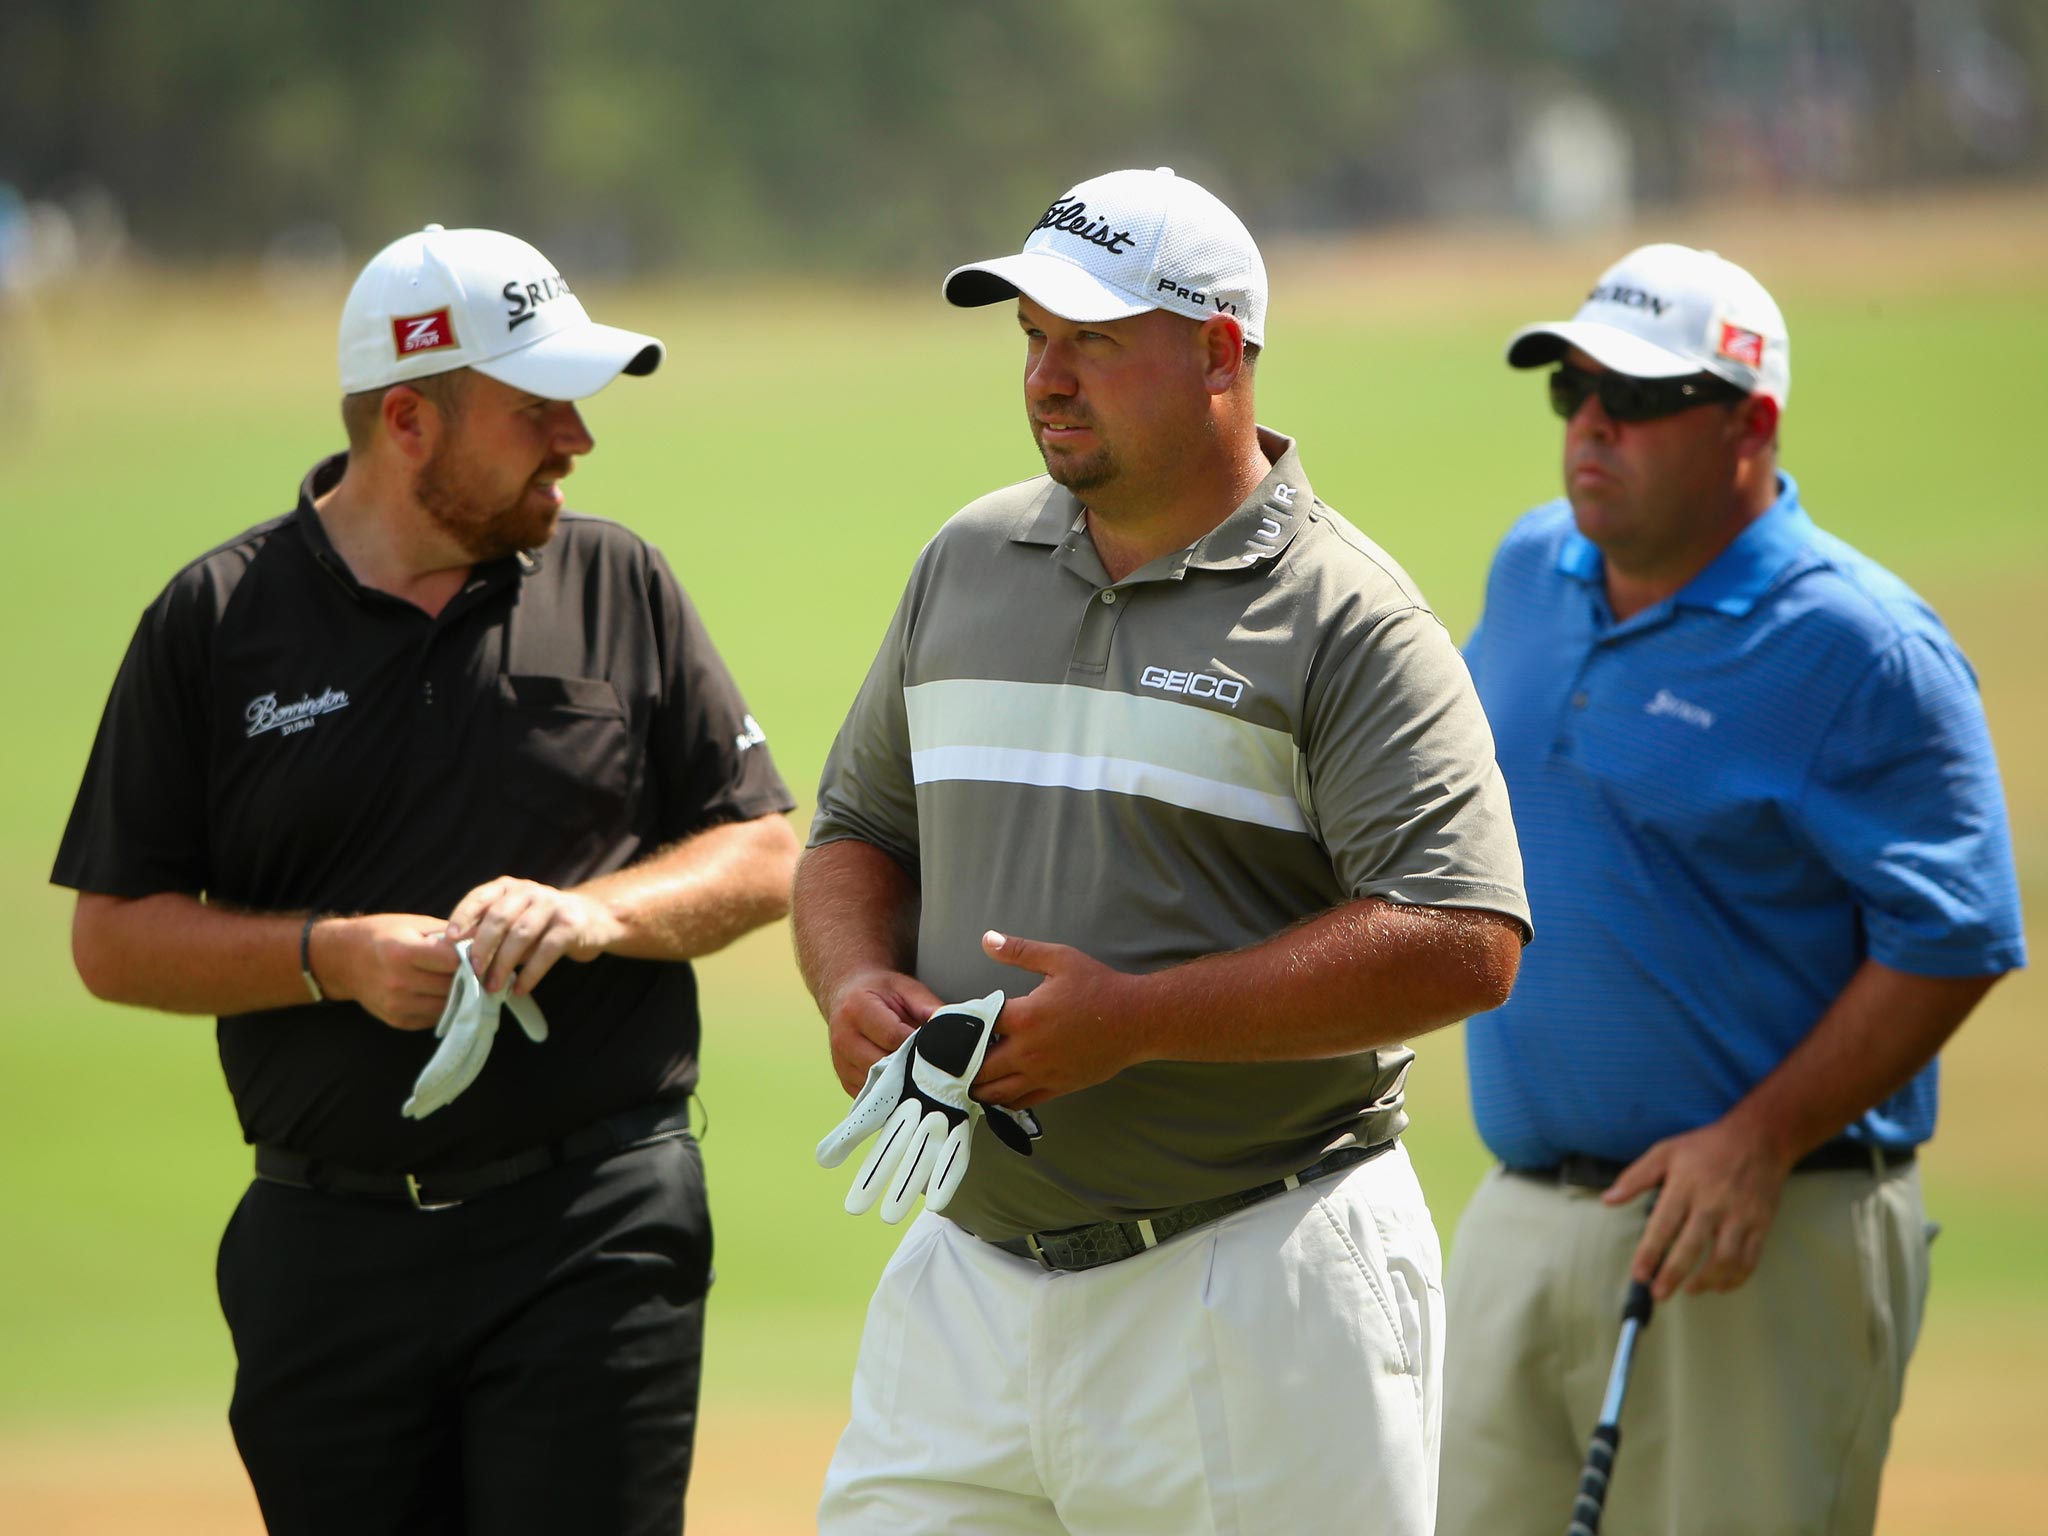 From left to right: Shane Lowry, of Ireland, Zimbabwe’s
Brendon de Jonge and Kevin Stadler, of the United States